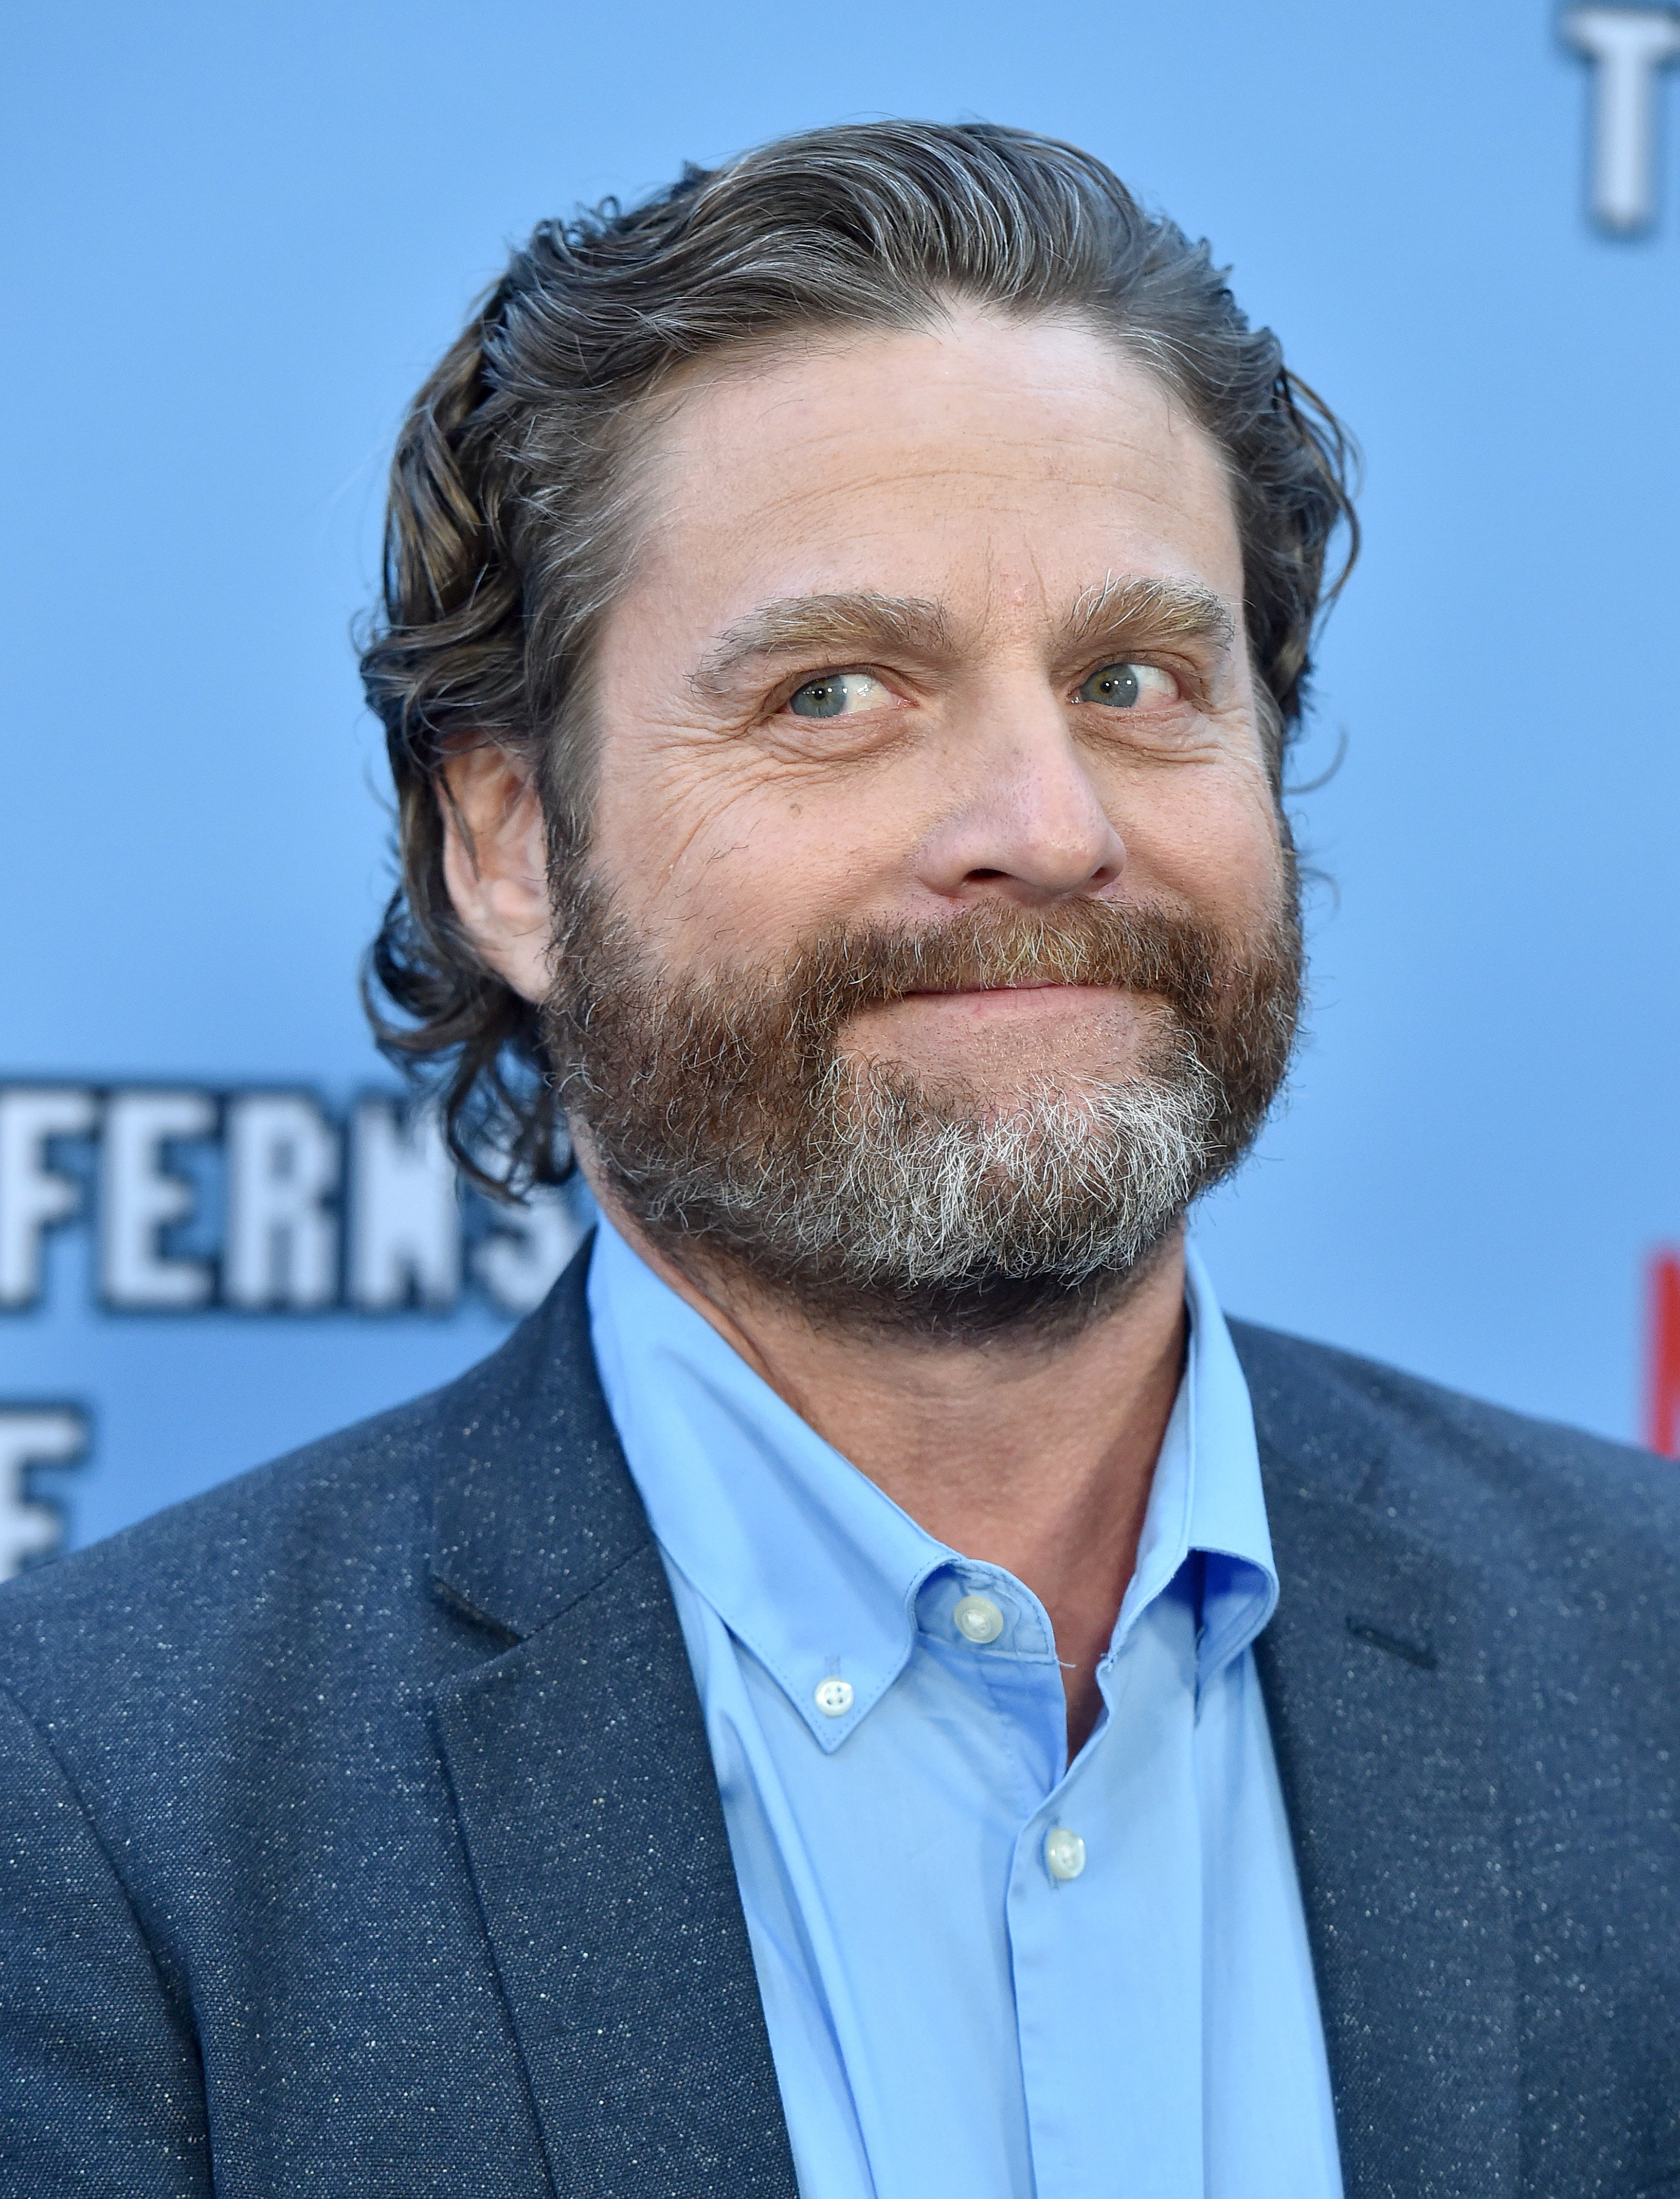 Zach Galifianakis attends the LA Premiere of Netflix's "Between Two Ferns: The Movie" at ArcLight Hollywood on September 16, 2019 in Hollywood, California. | Source: Getty Images 